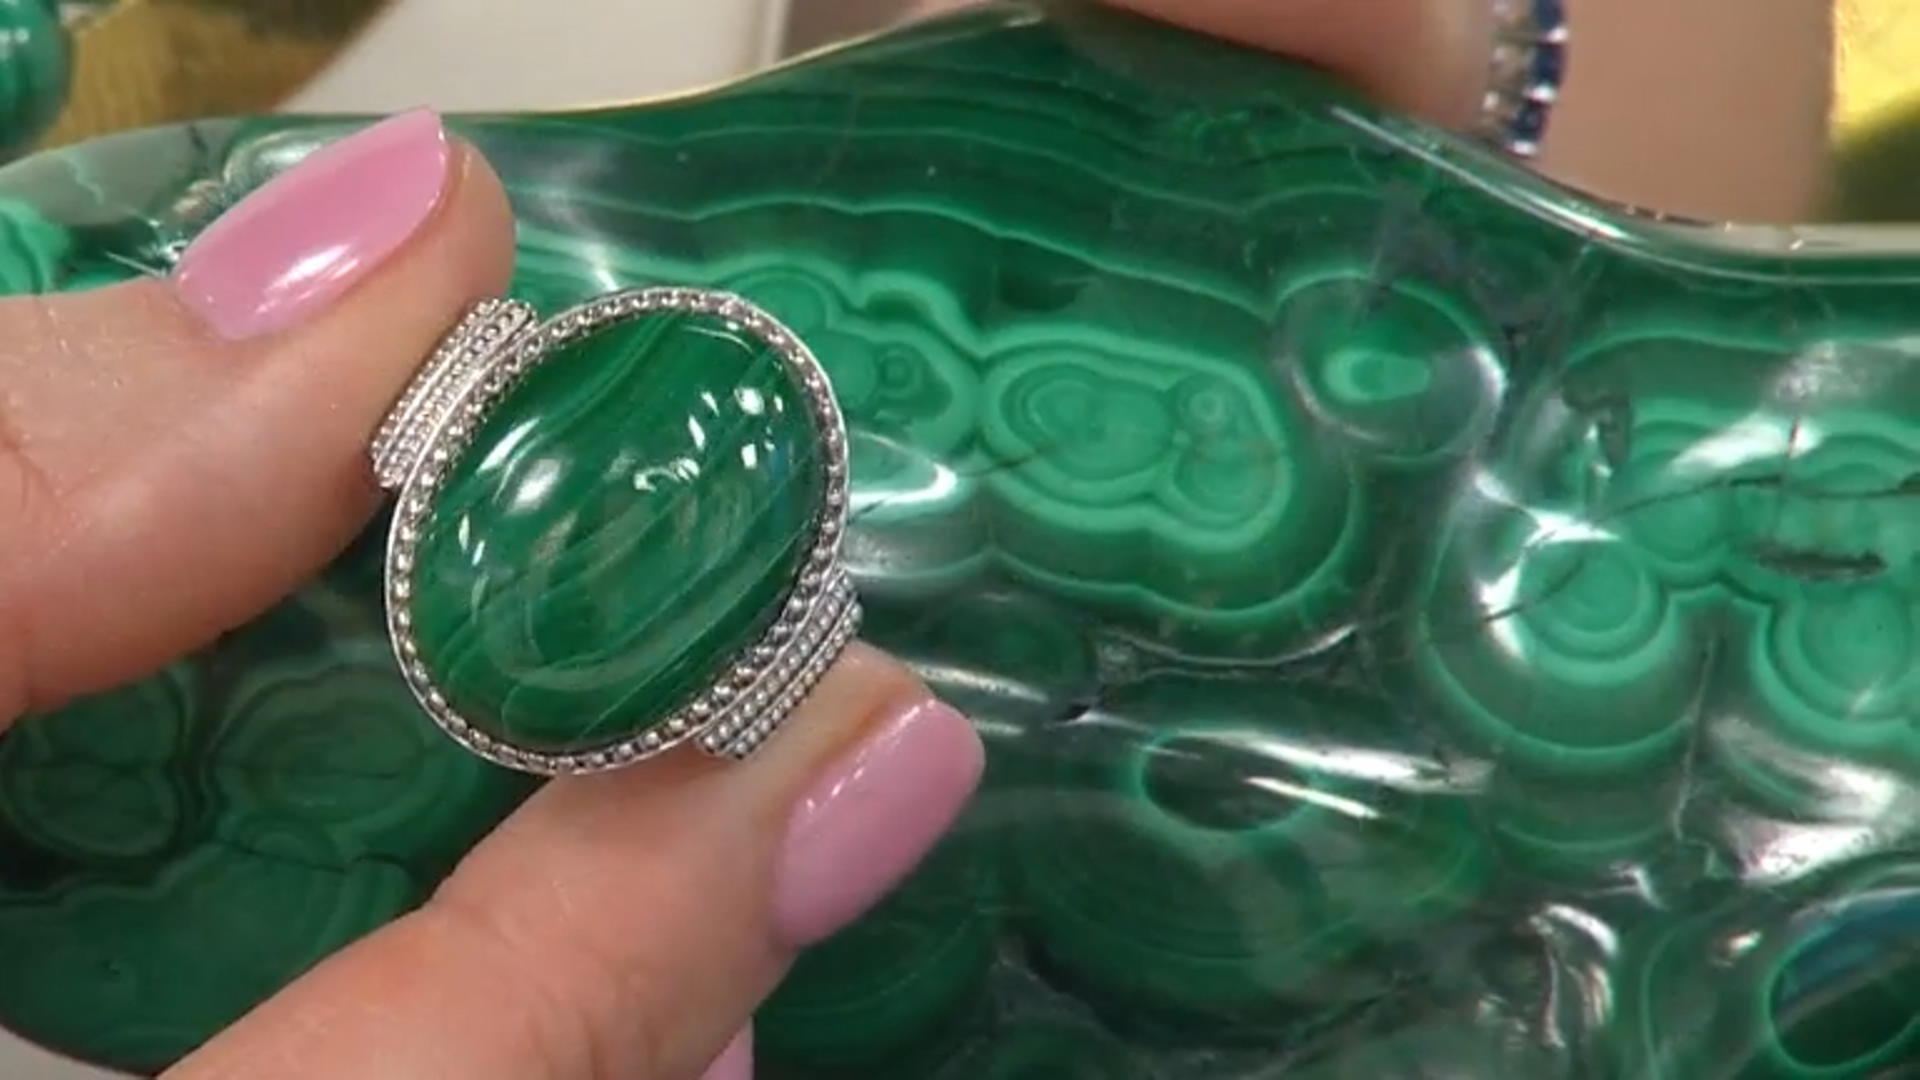 Green malachite rhodium over sterling silver ring Video Thumbnail